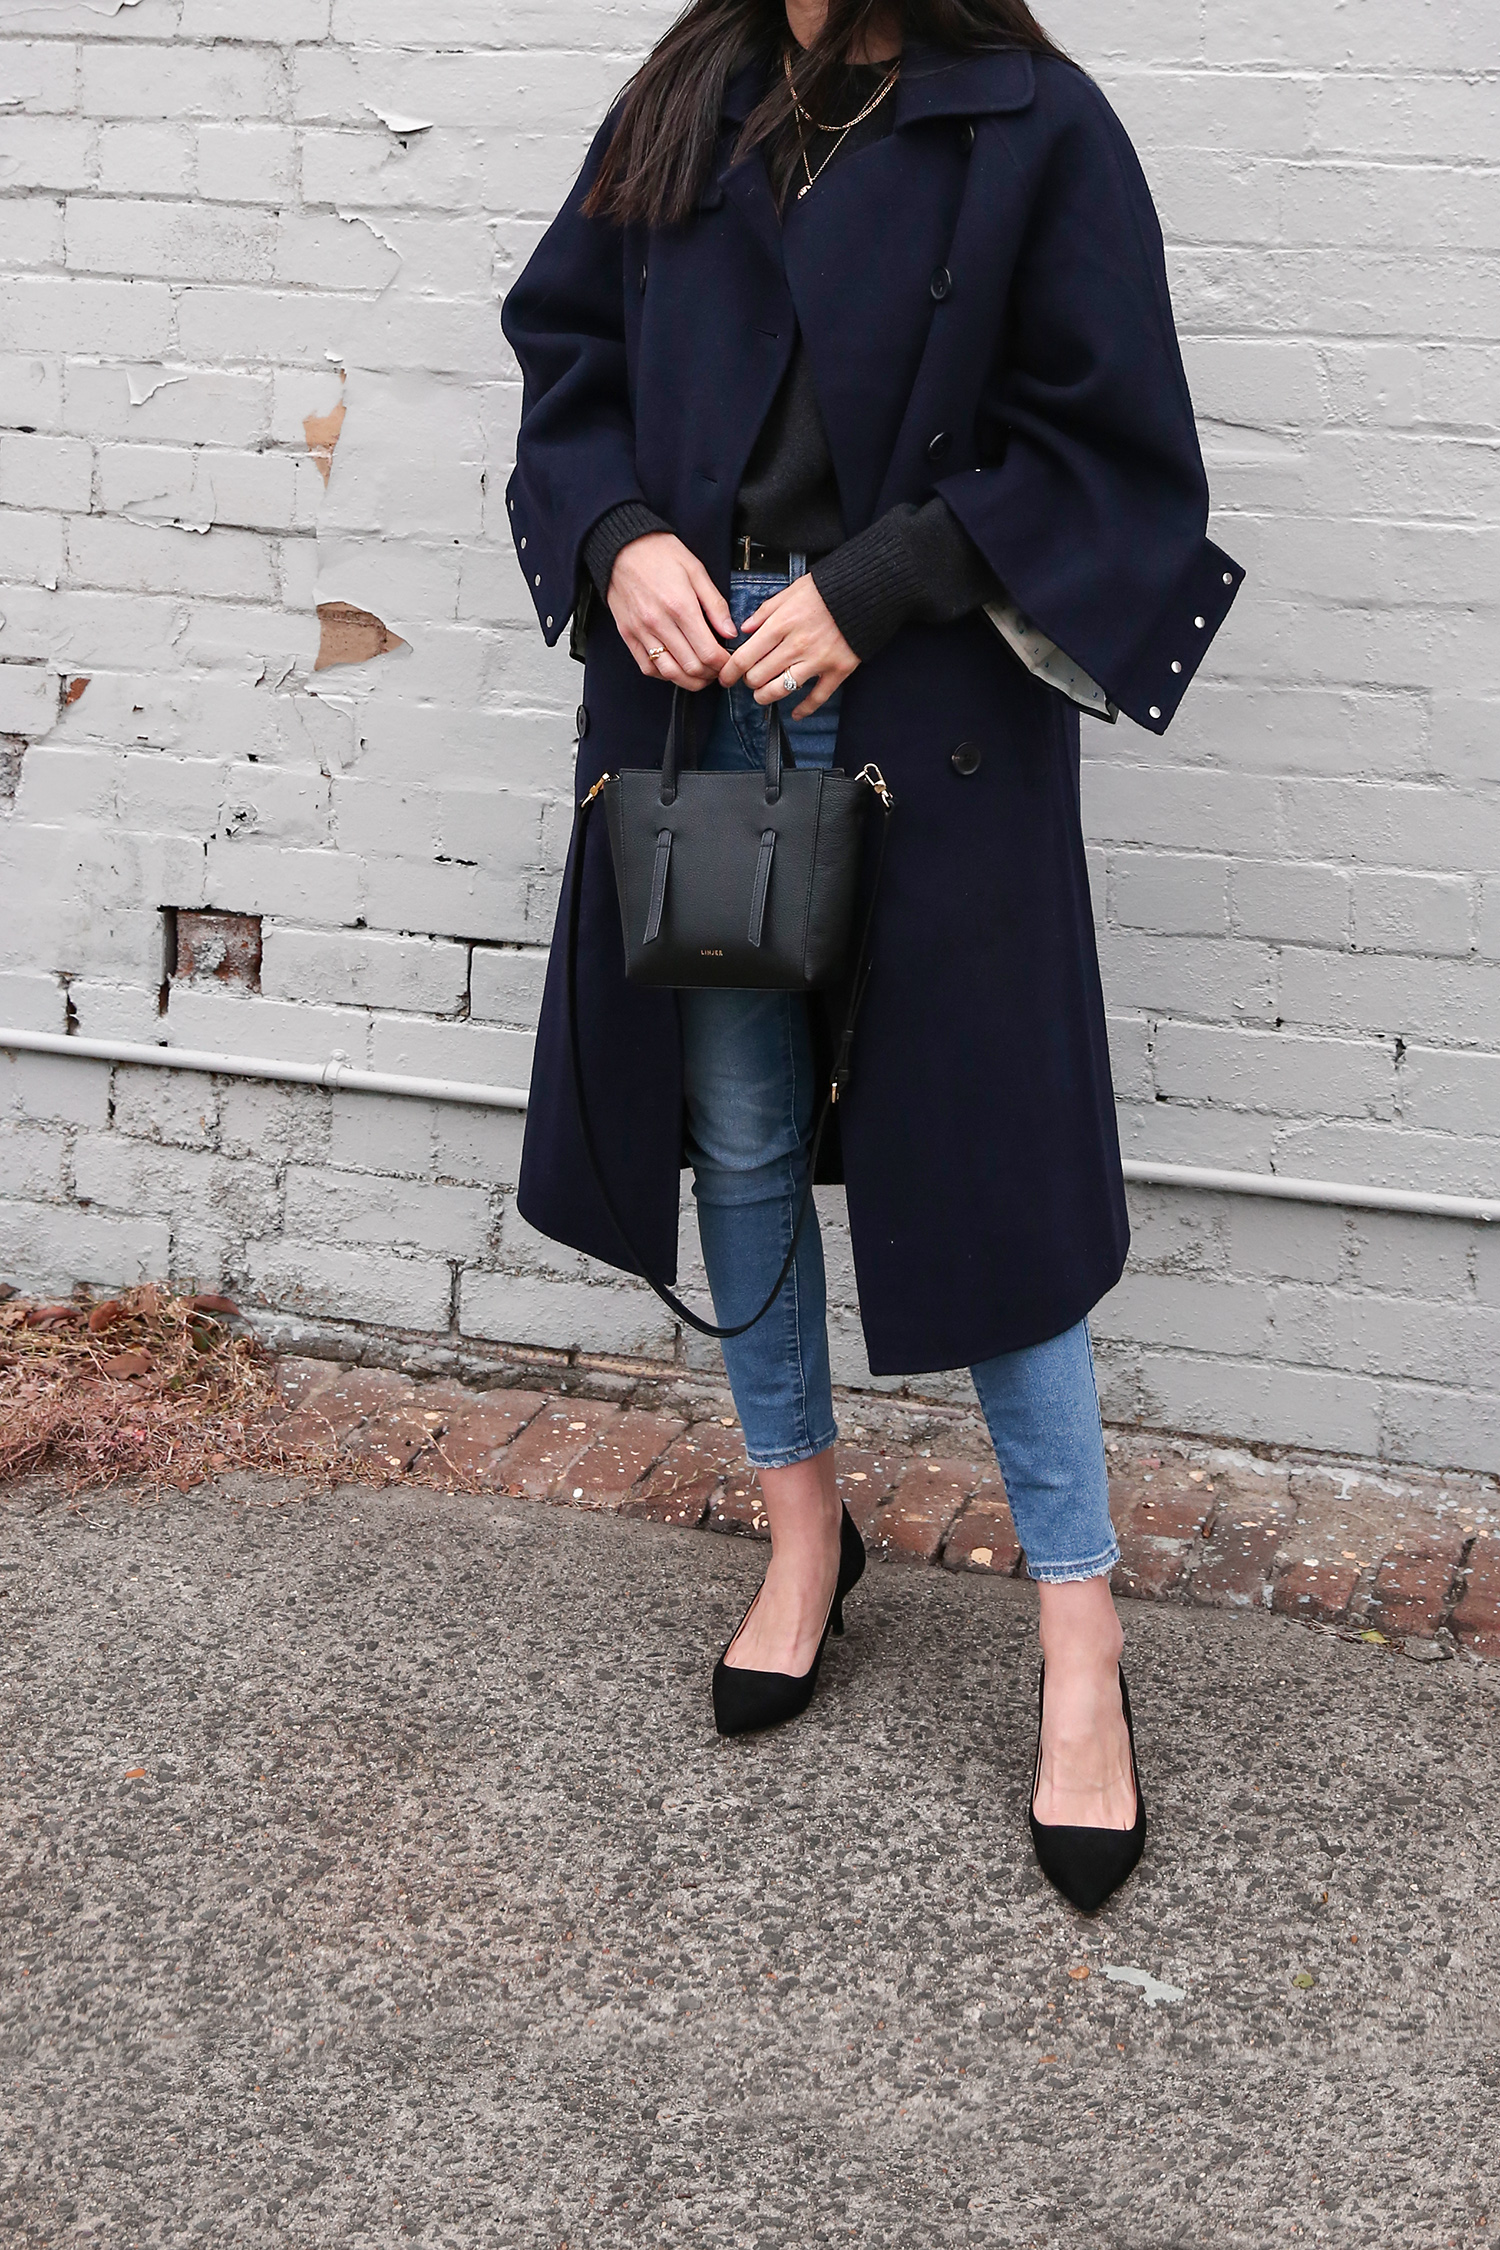 Jamie Lee of Mademoiselle wearing a Scandi inspired minimal outfit